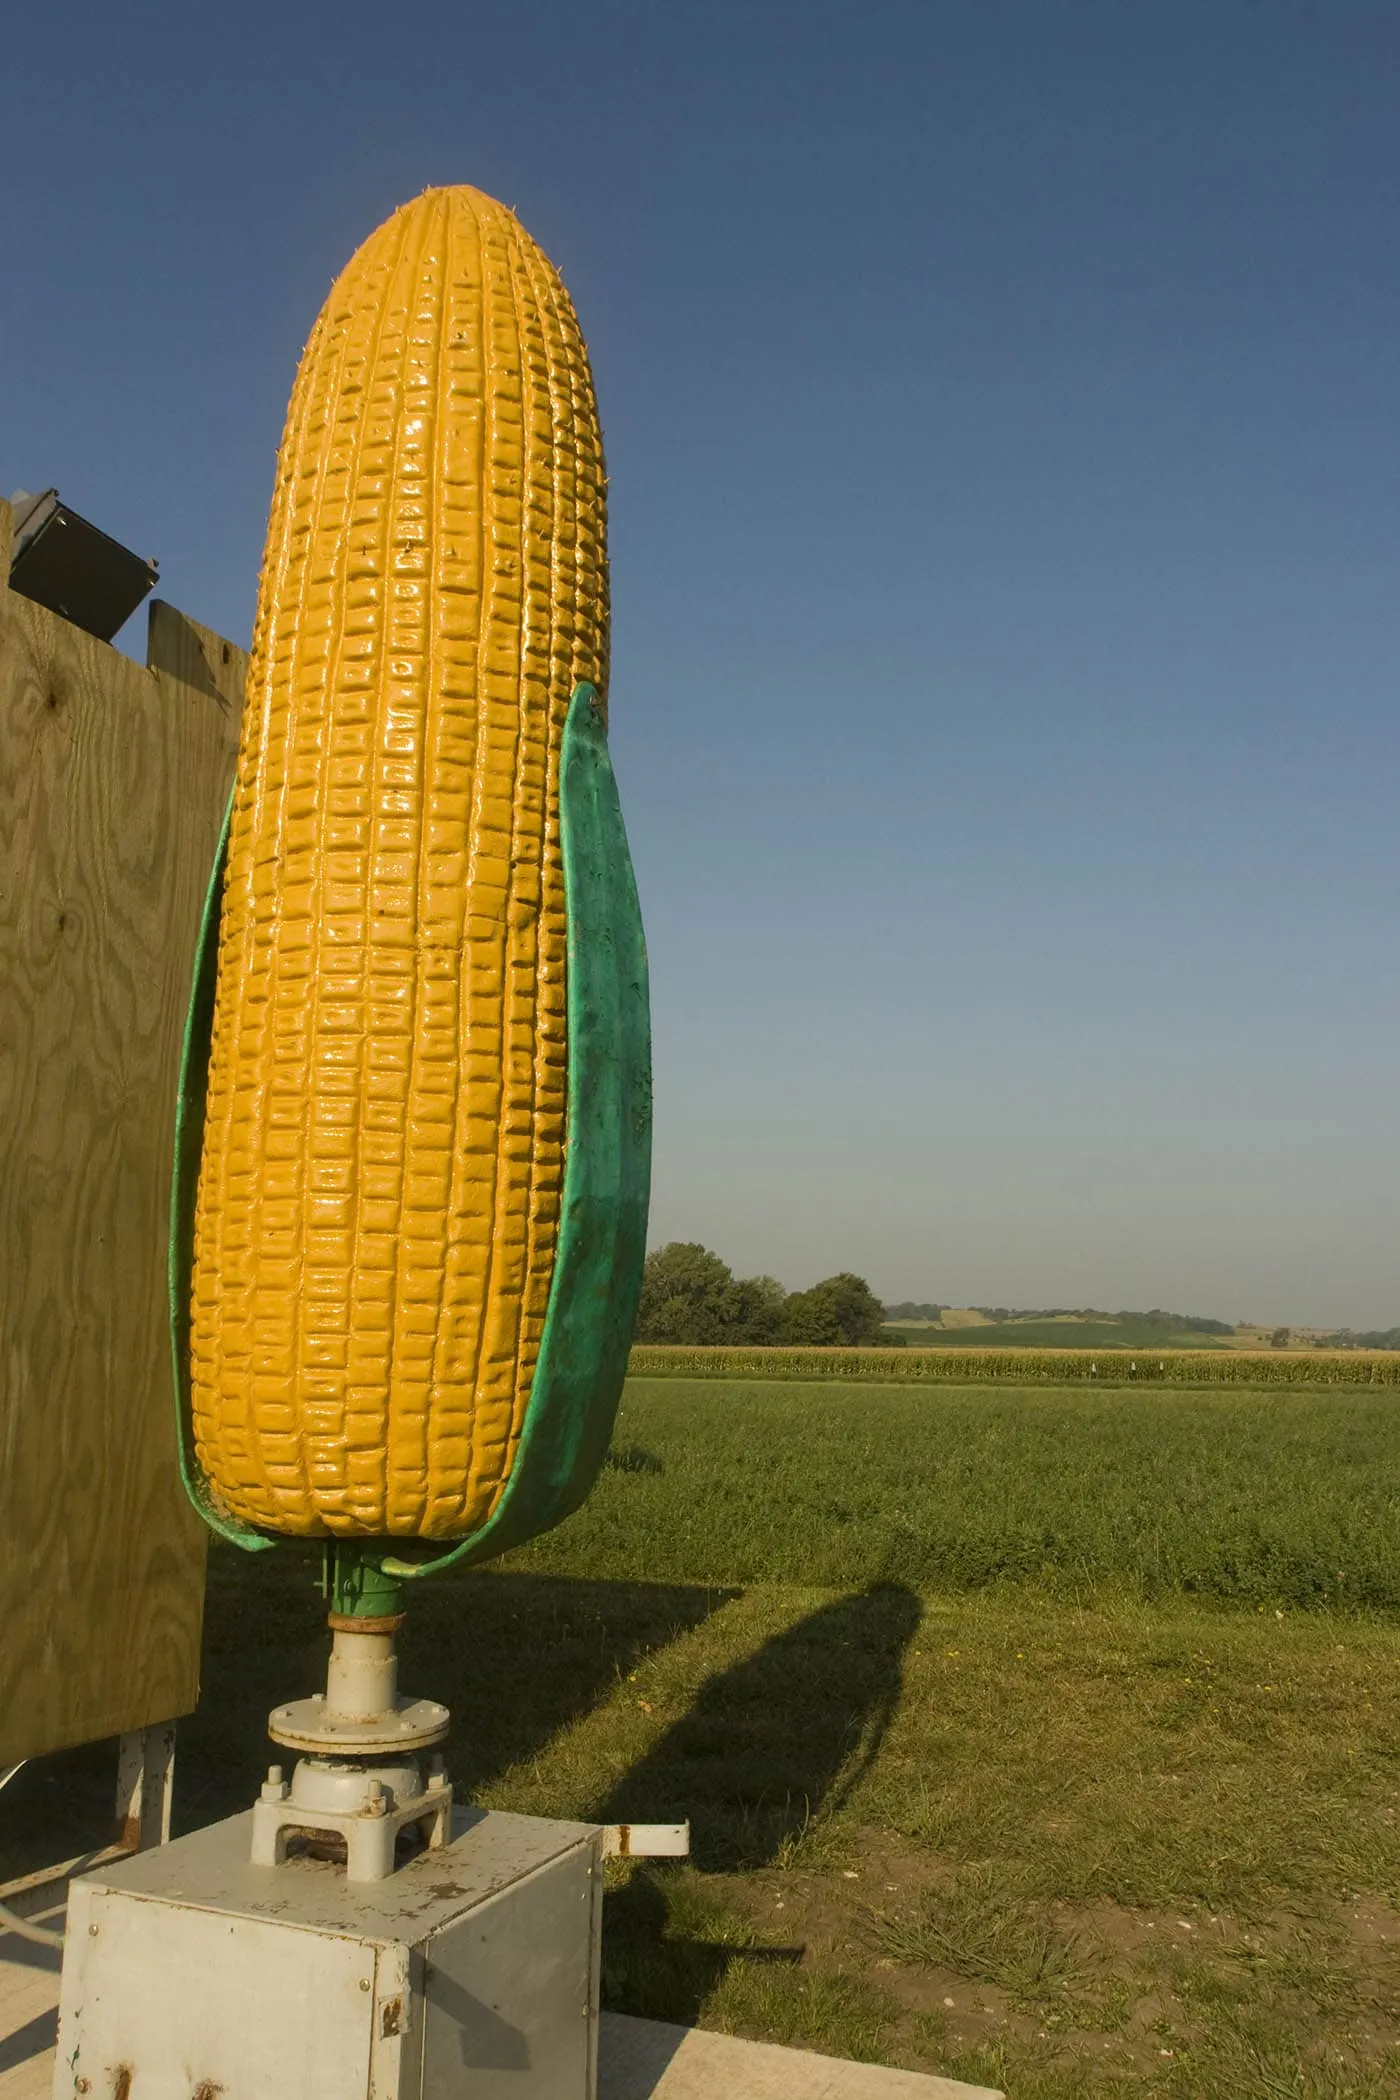 Large Rotating Ear of Corn - a roadside attraction in Coon Rapids, Iowa